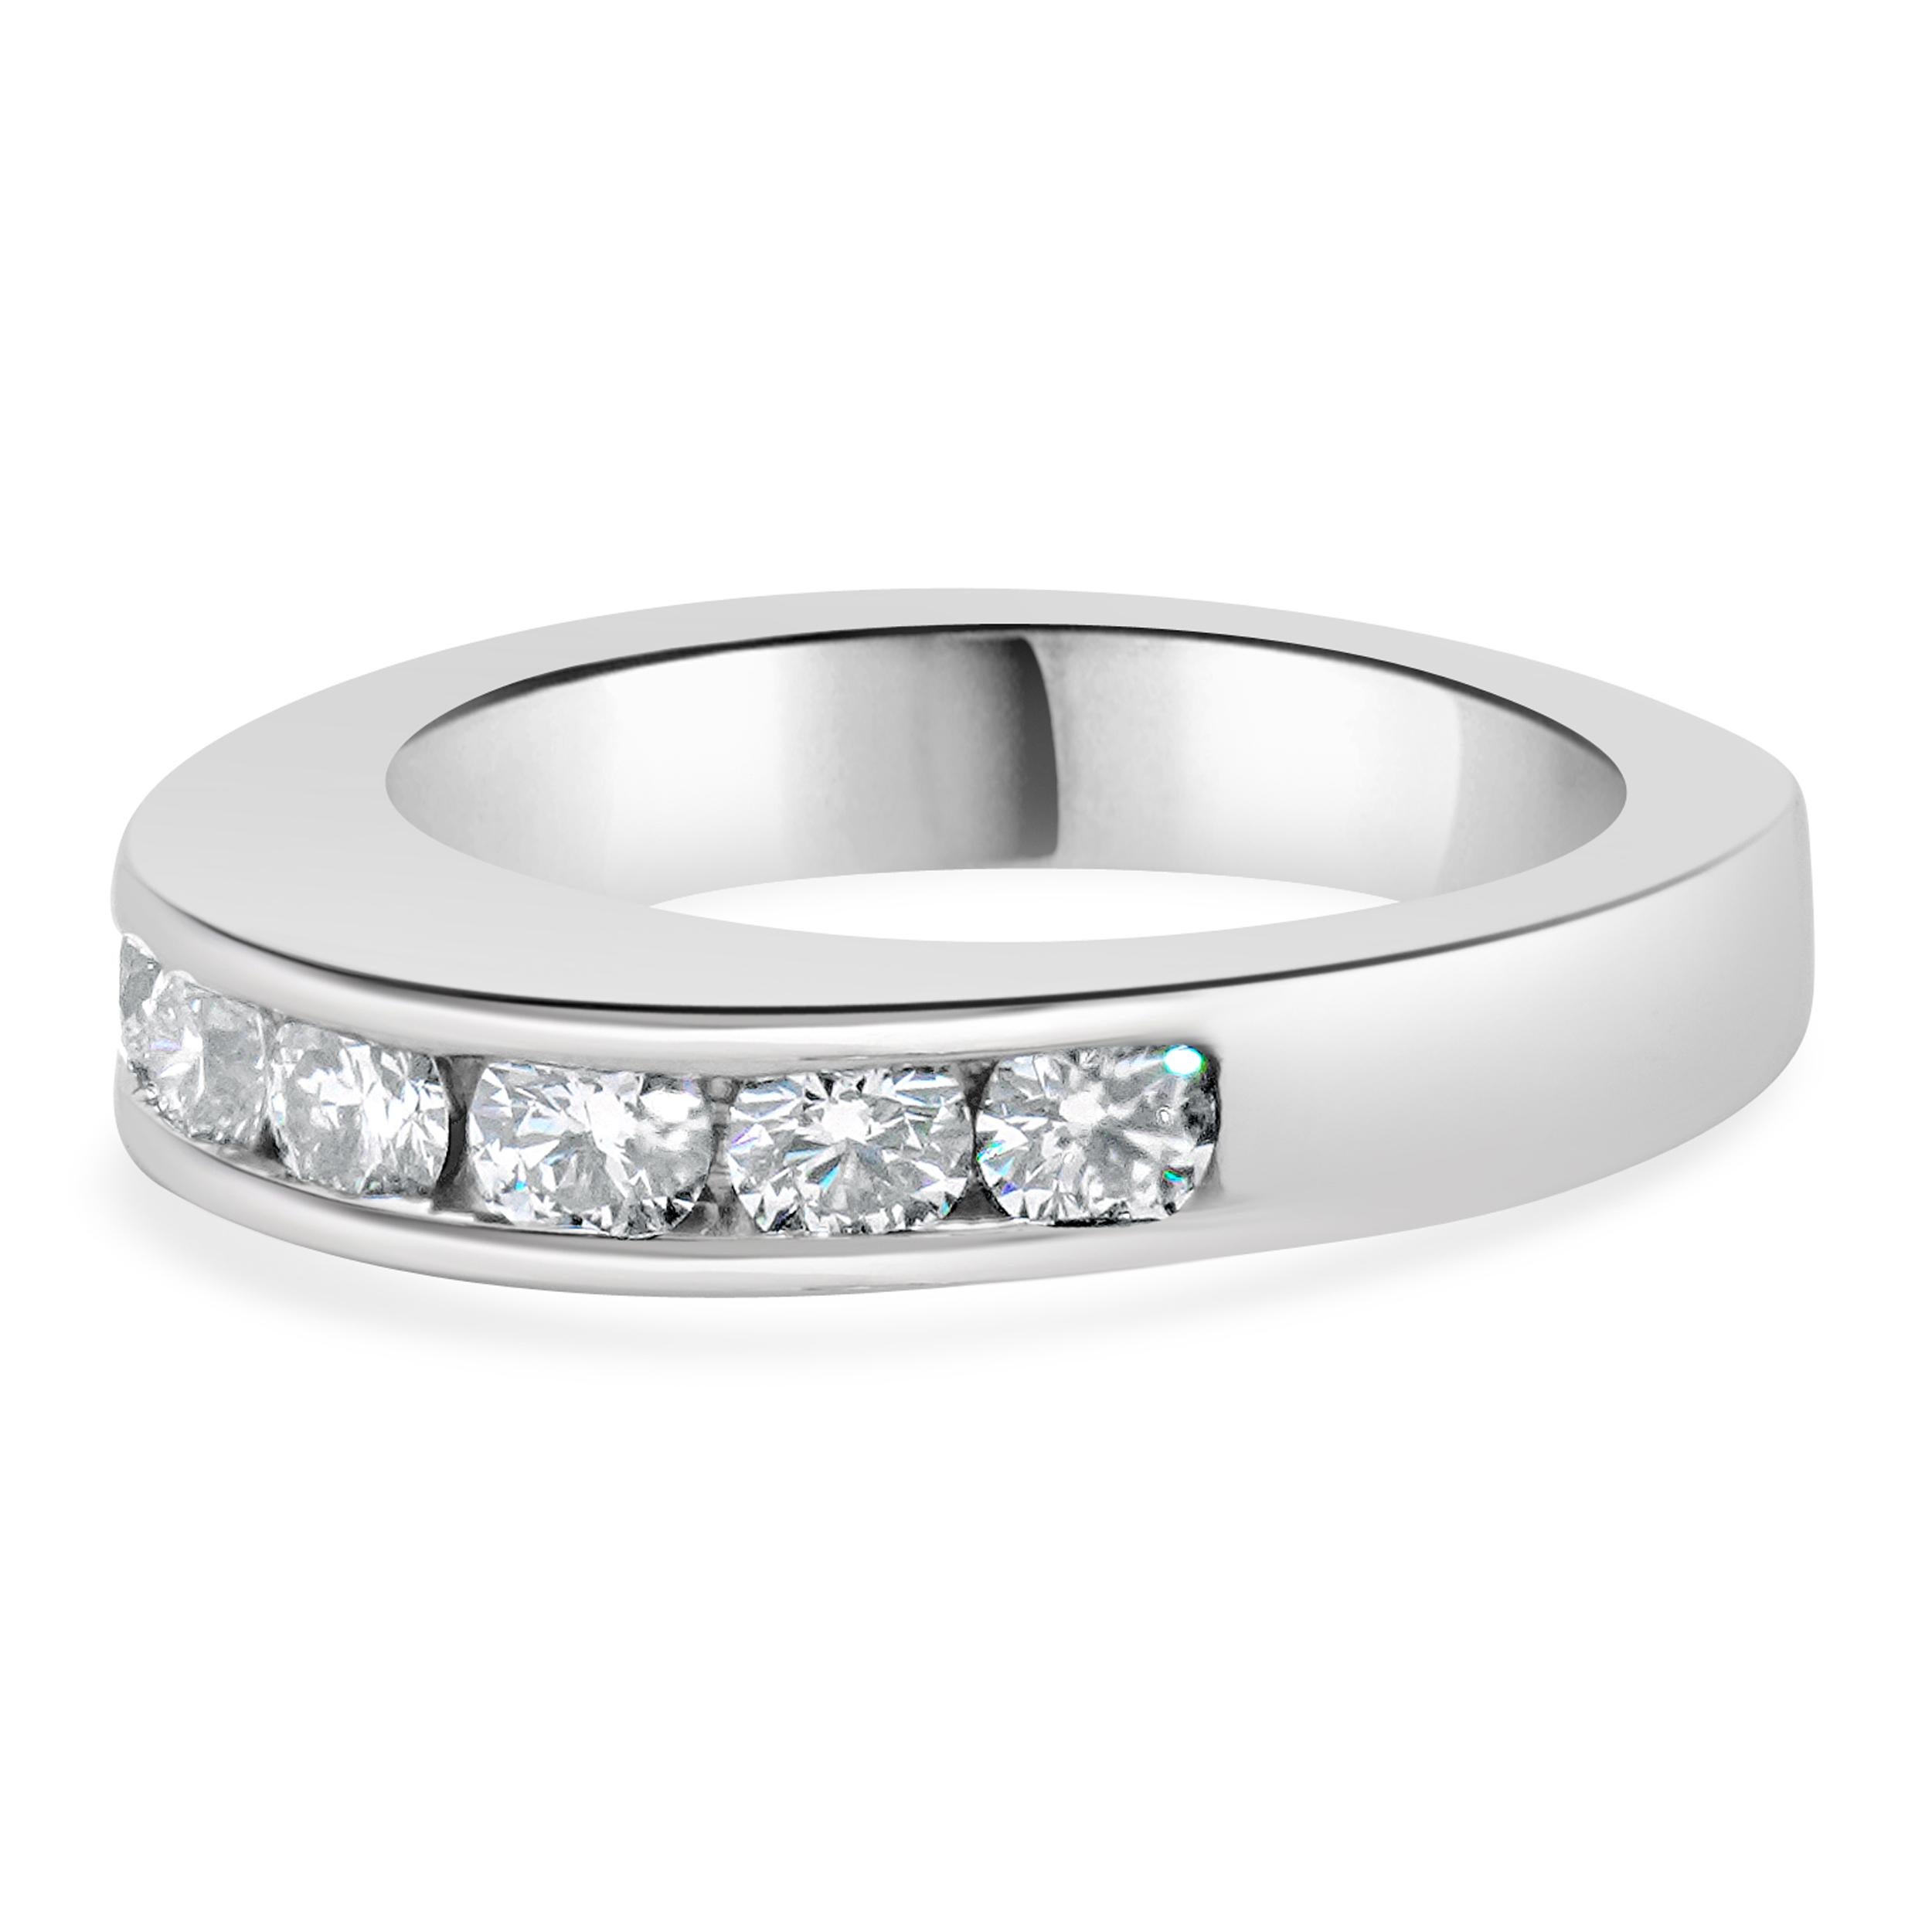 Designer: Custom
Material: 18K white gold
Diamonds: 8 round brilliant cut = 0.75cttw
Color: G / H
Clarity: VS2-SI1
Size: 4 sizing available 
Dimensions: ring top measures 4mm in width
Weight: 6.02 grams